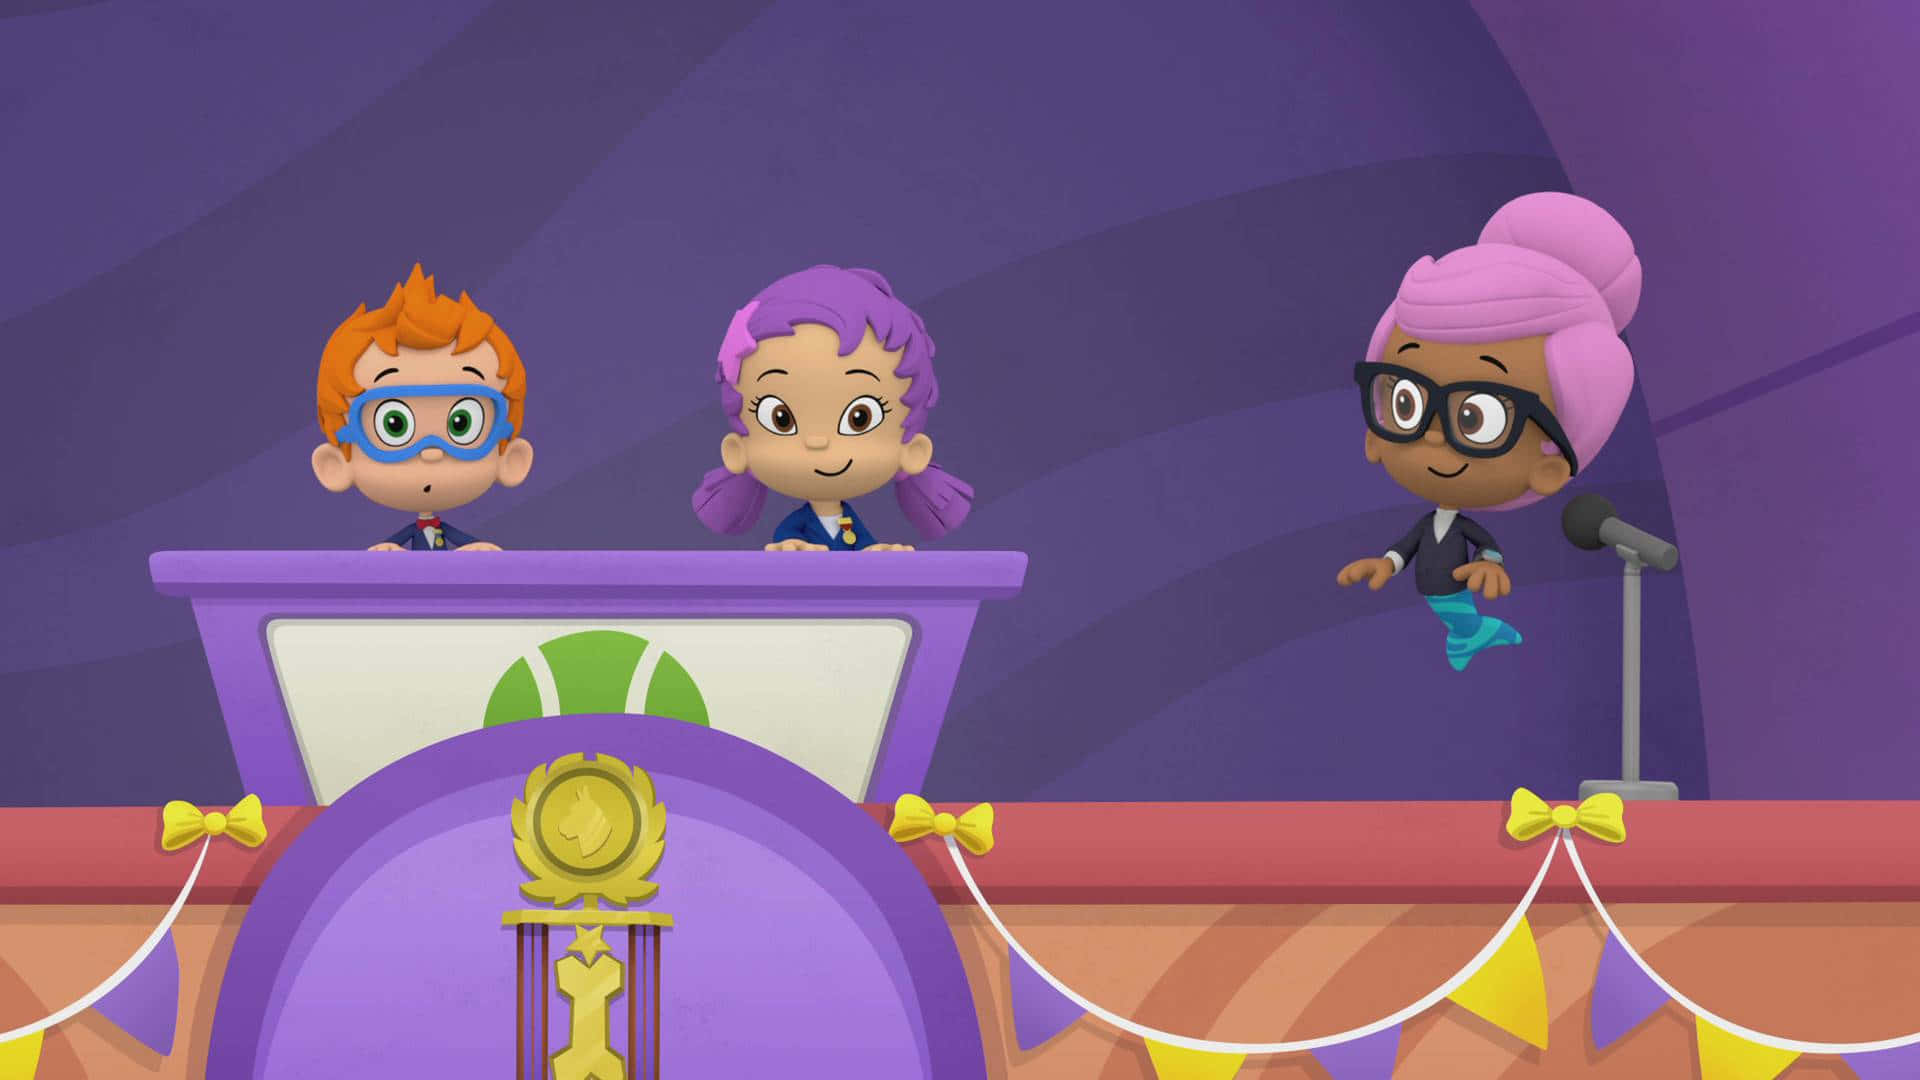 Join the Bubble Guppies in a fun underwater adventure!